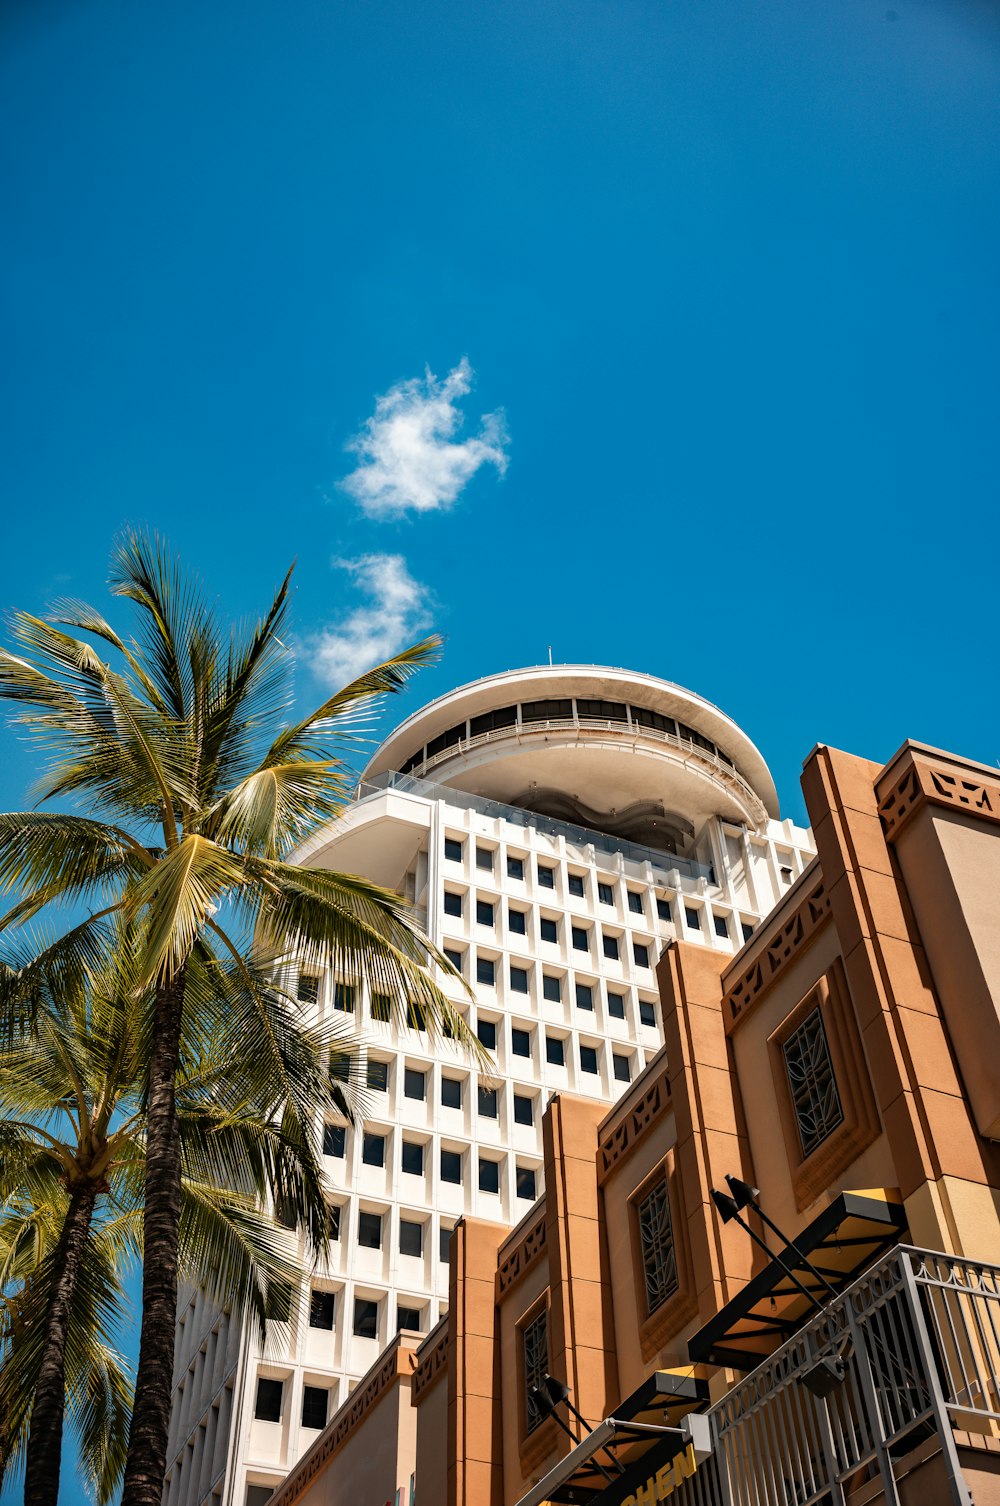 a palm tree in front of a large building